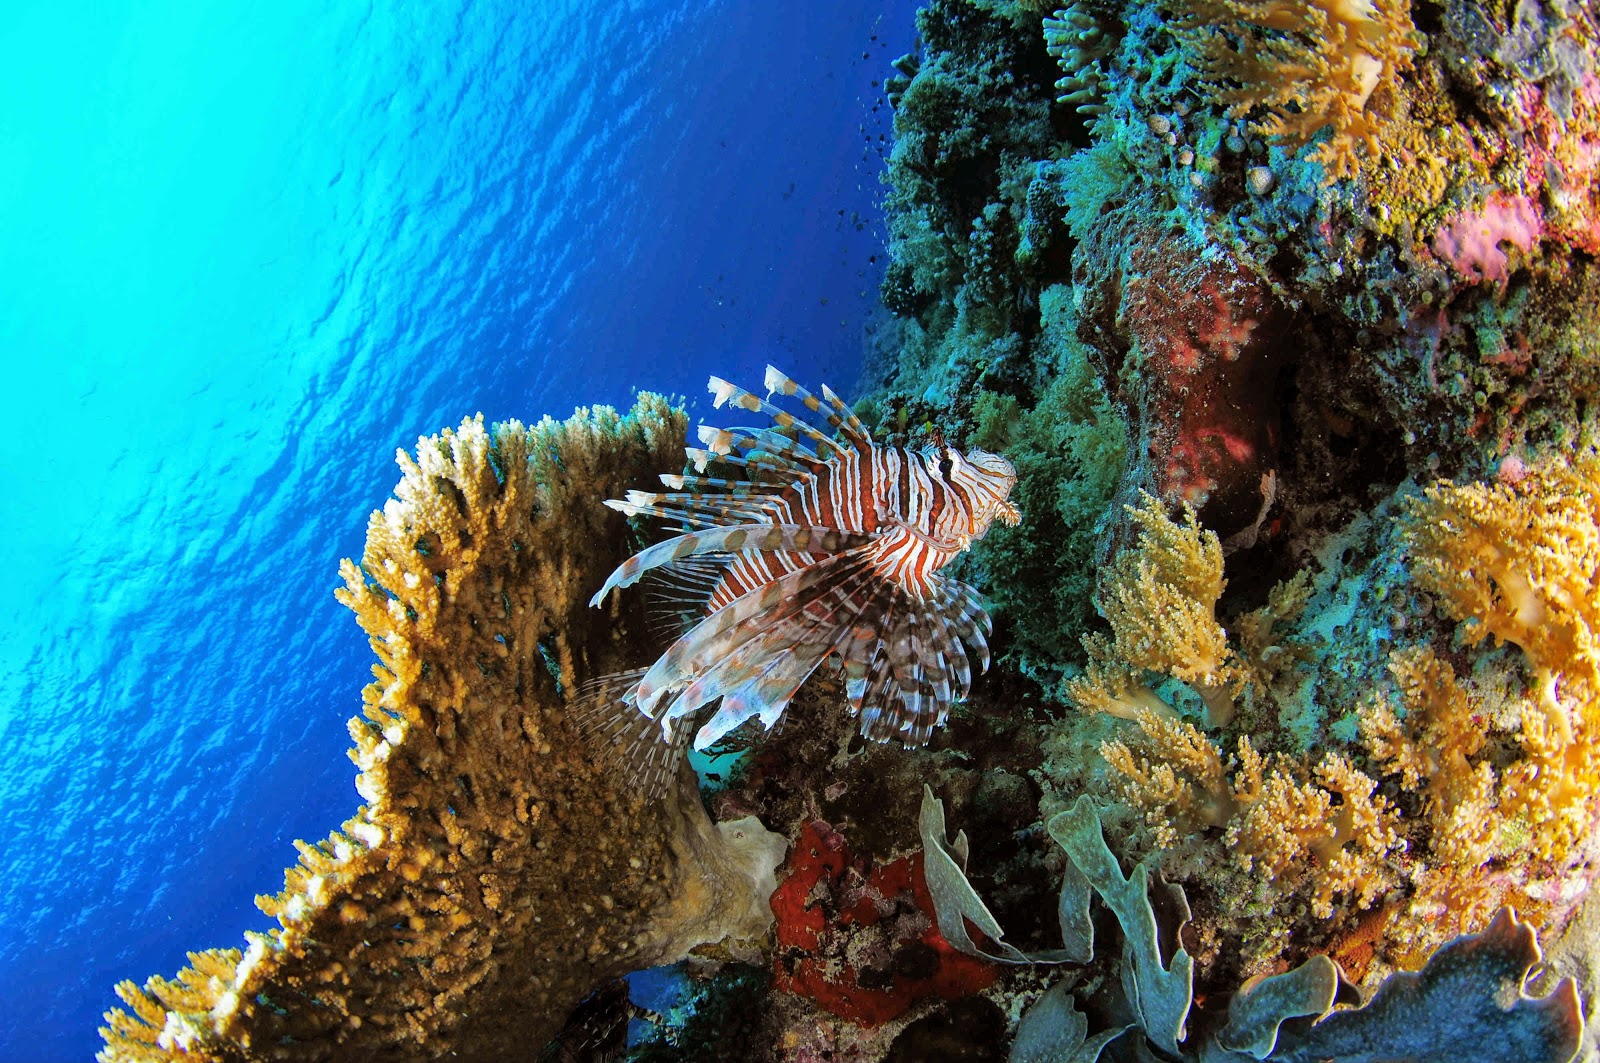 Coral Reef - HD Wallpapers | Earth Blog